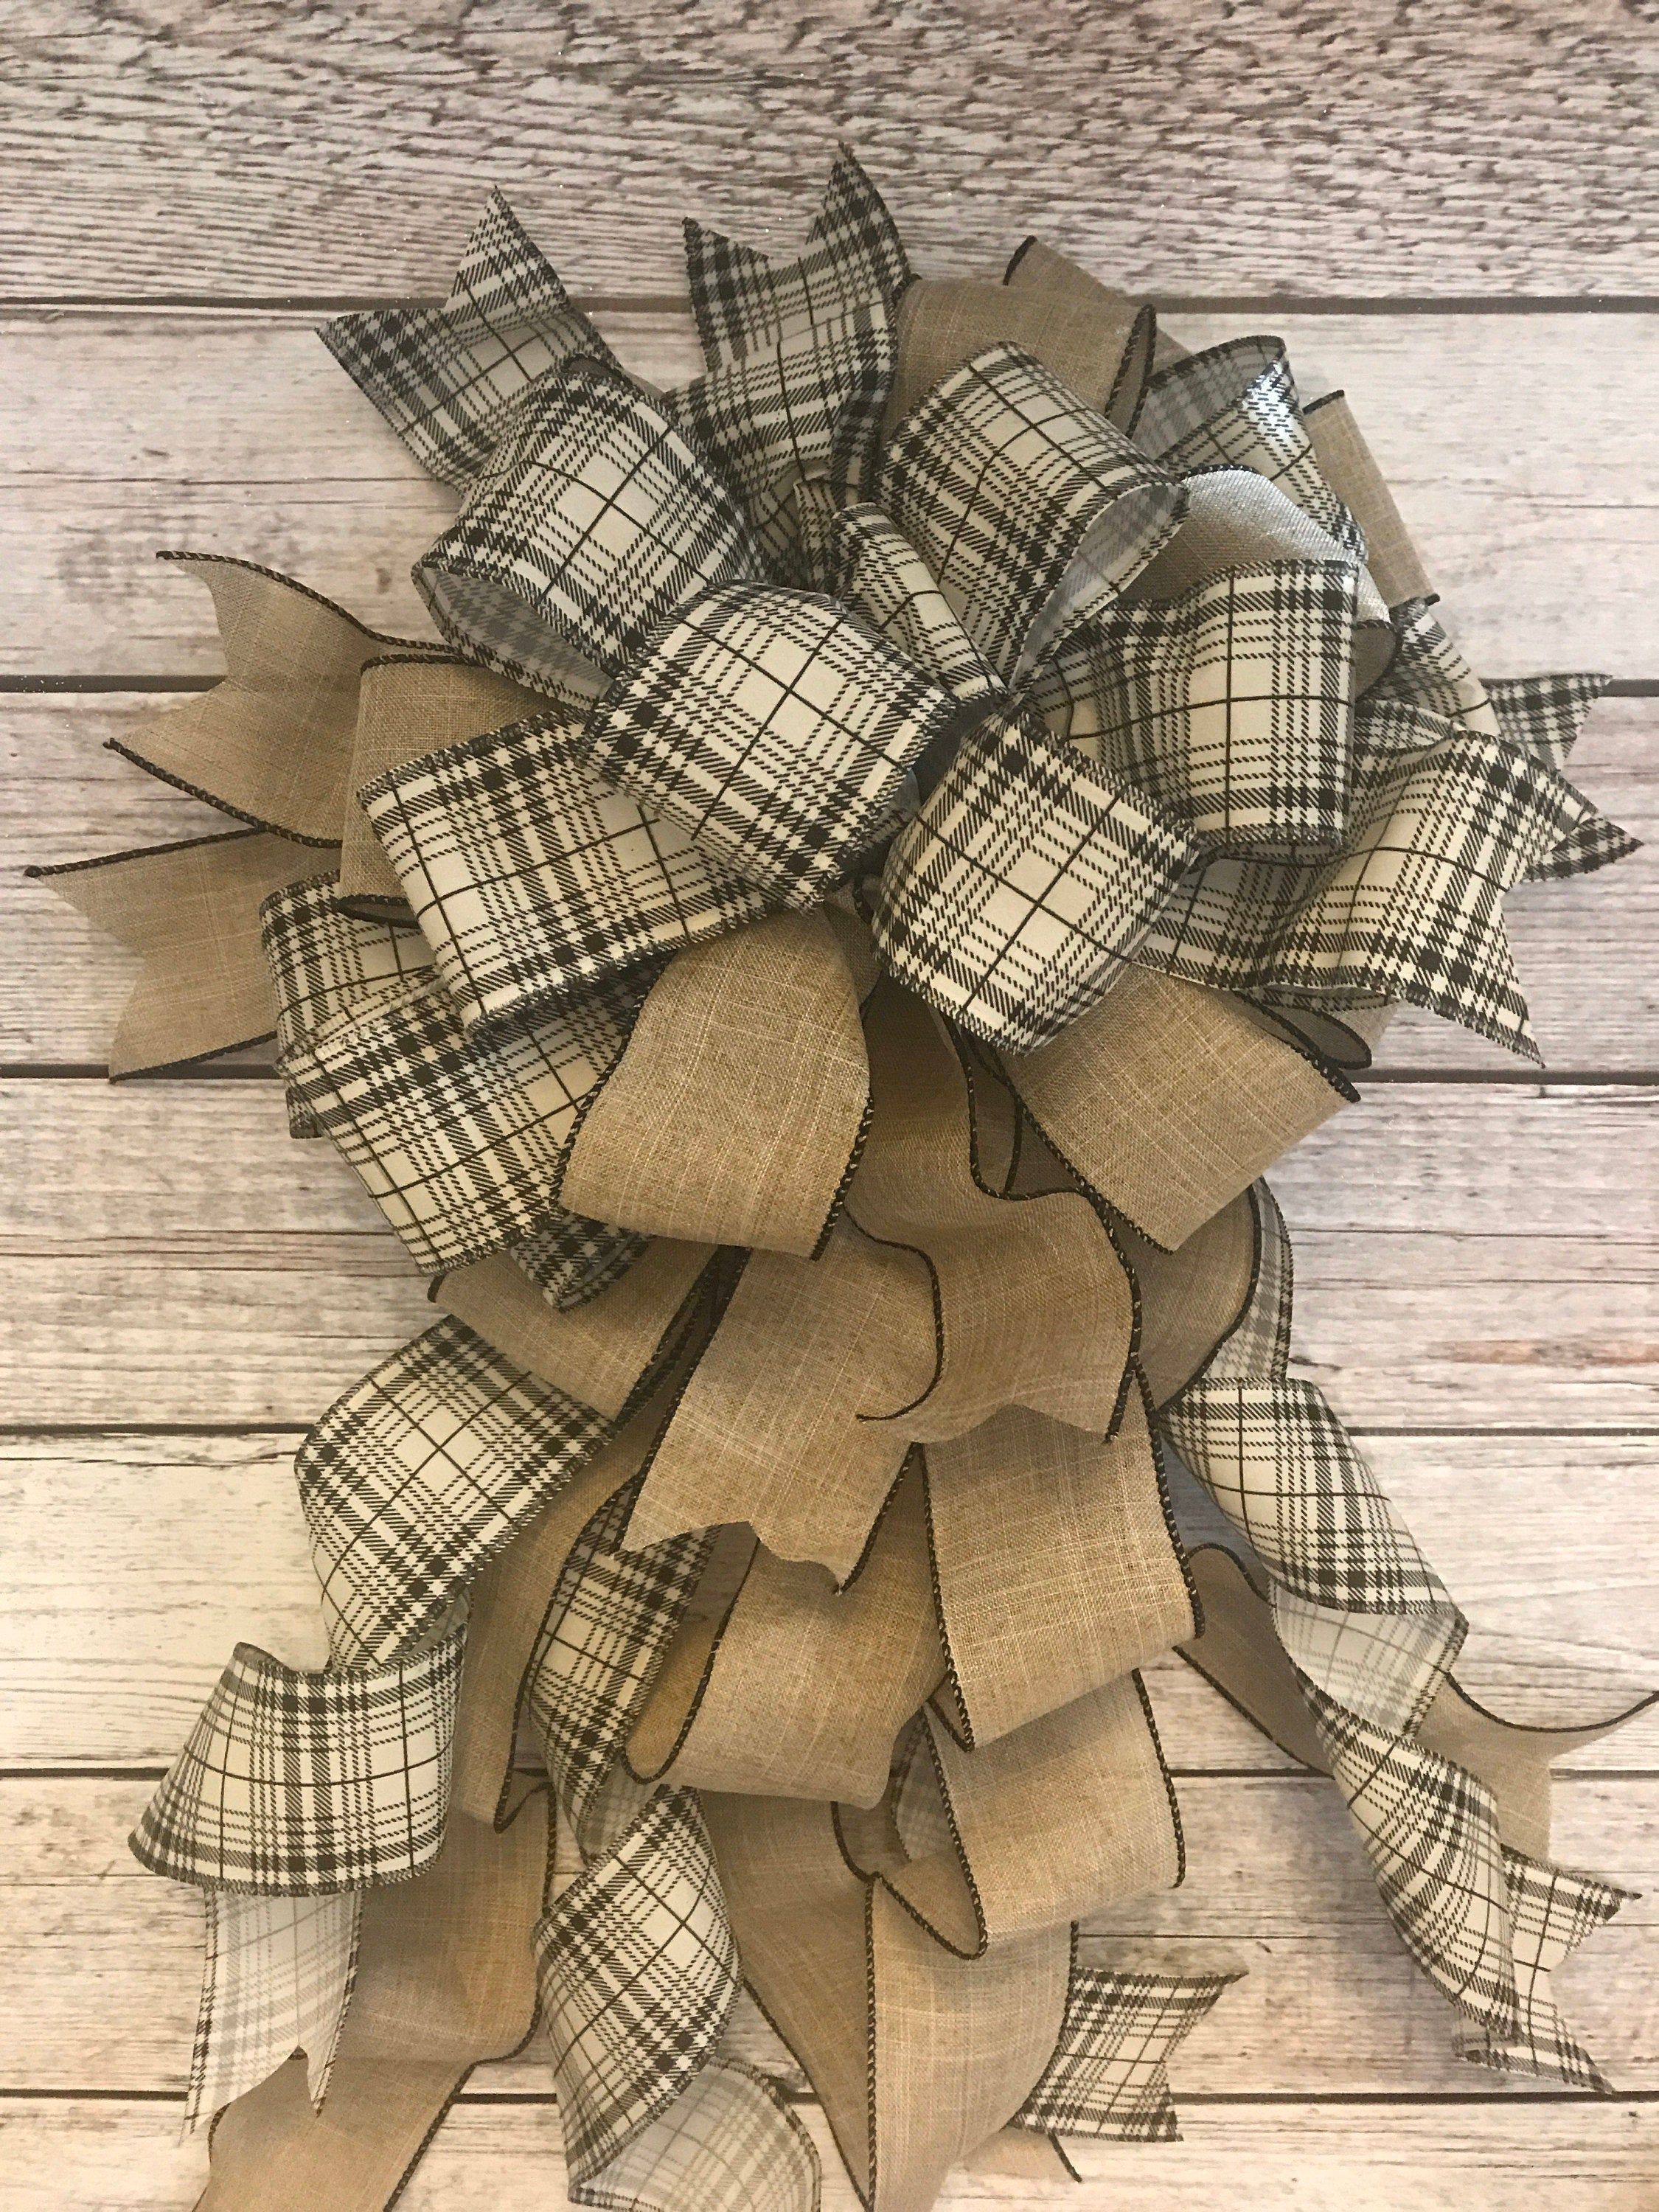 New Reduced PriceLarge Black and White Plaid Burlap Rustic | Etsy - New Reduced PriceLarge Black and White Plaid Burlap Rustic | Etsy -   16 rustic christmas tree topper burlap bows ideas